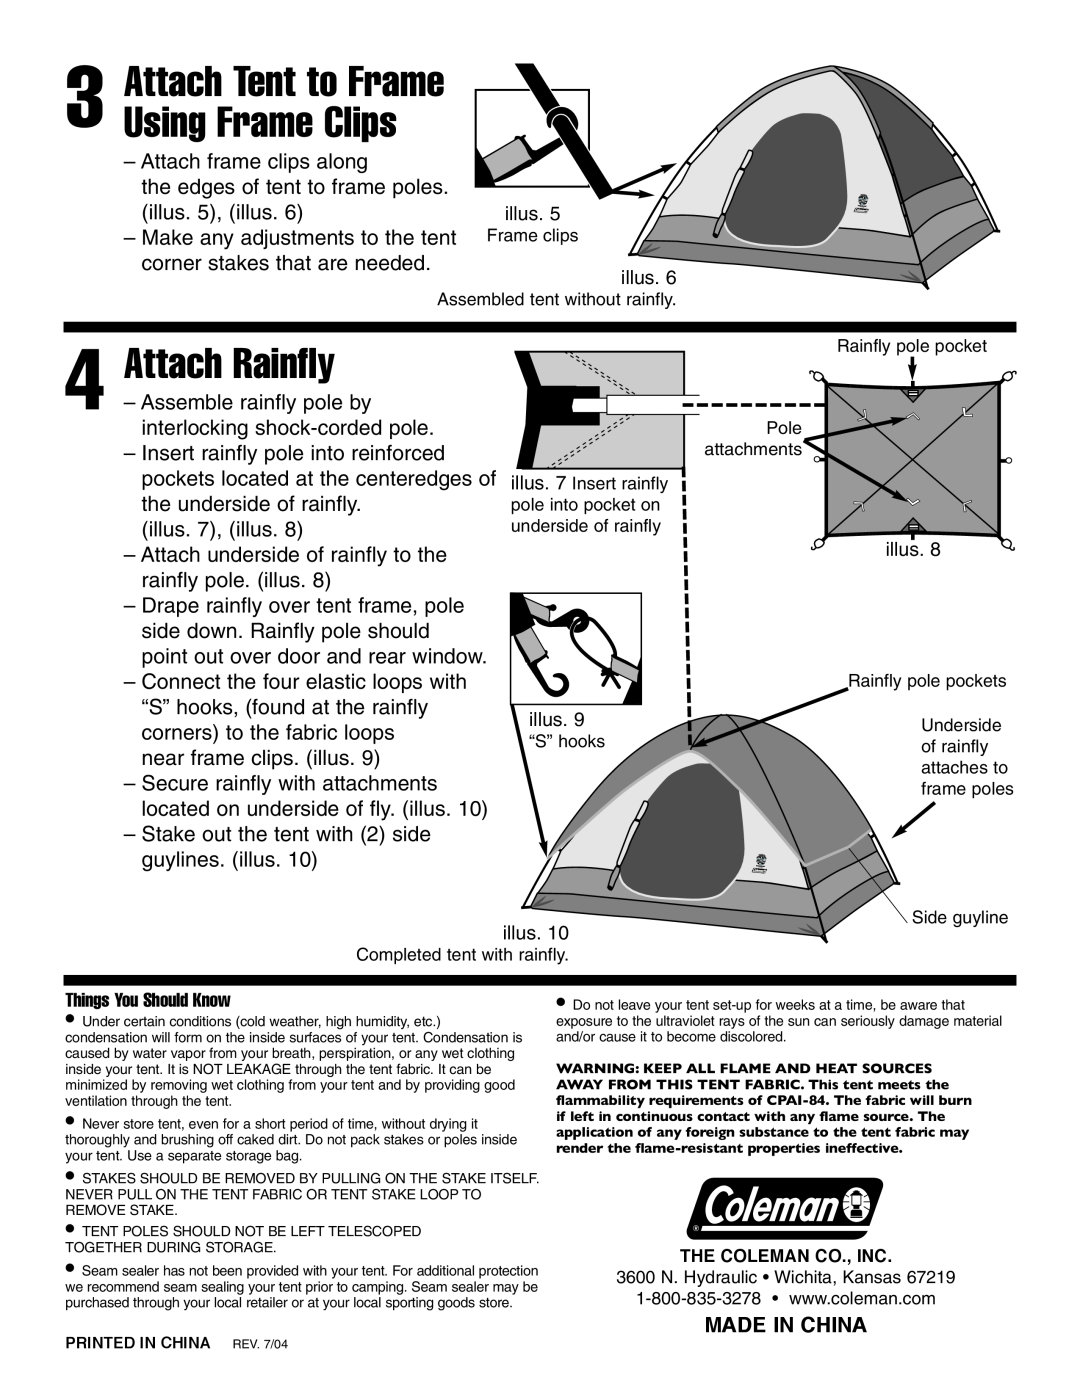 Coleman 9180-304, 9240-707, 9180-305, 9180-306 manual Attach Rainfly, Attach Tent to Frame Using Frame Clips, Made In China 